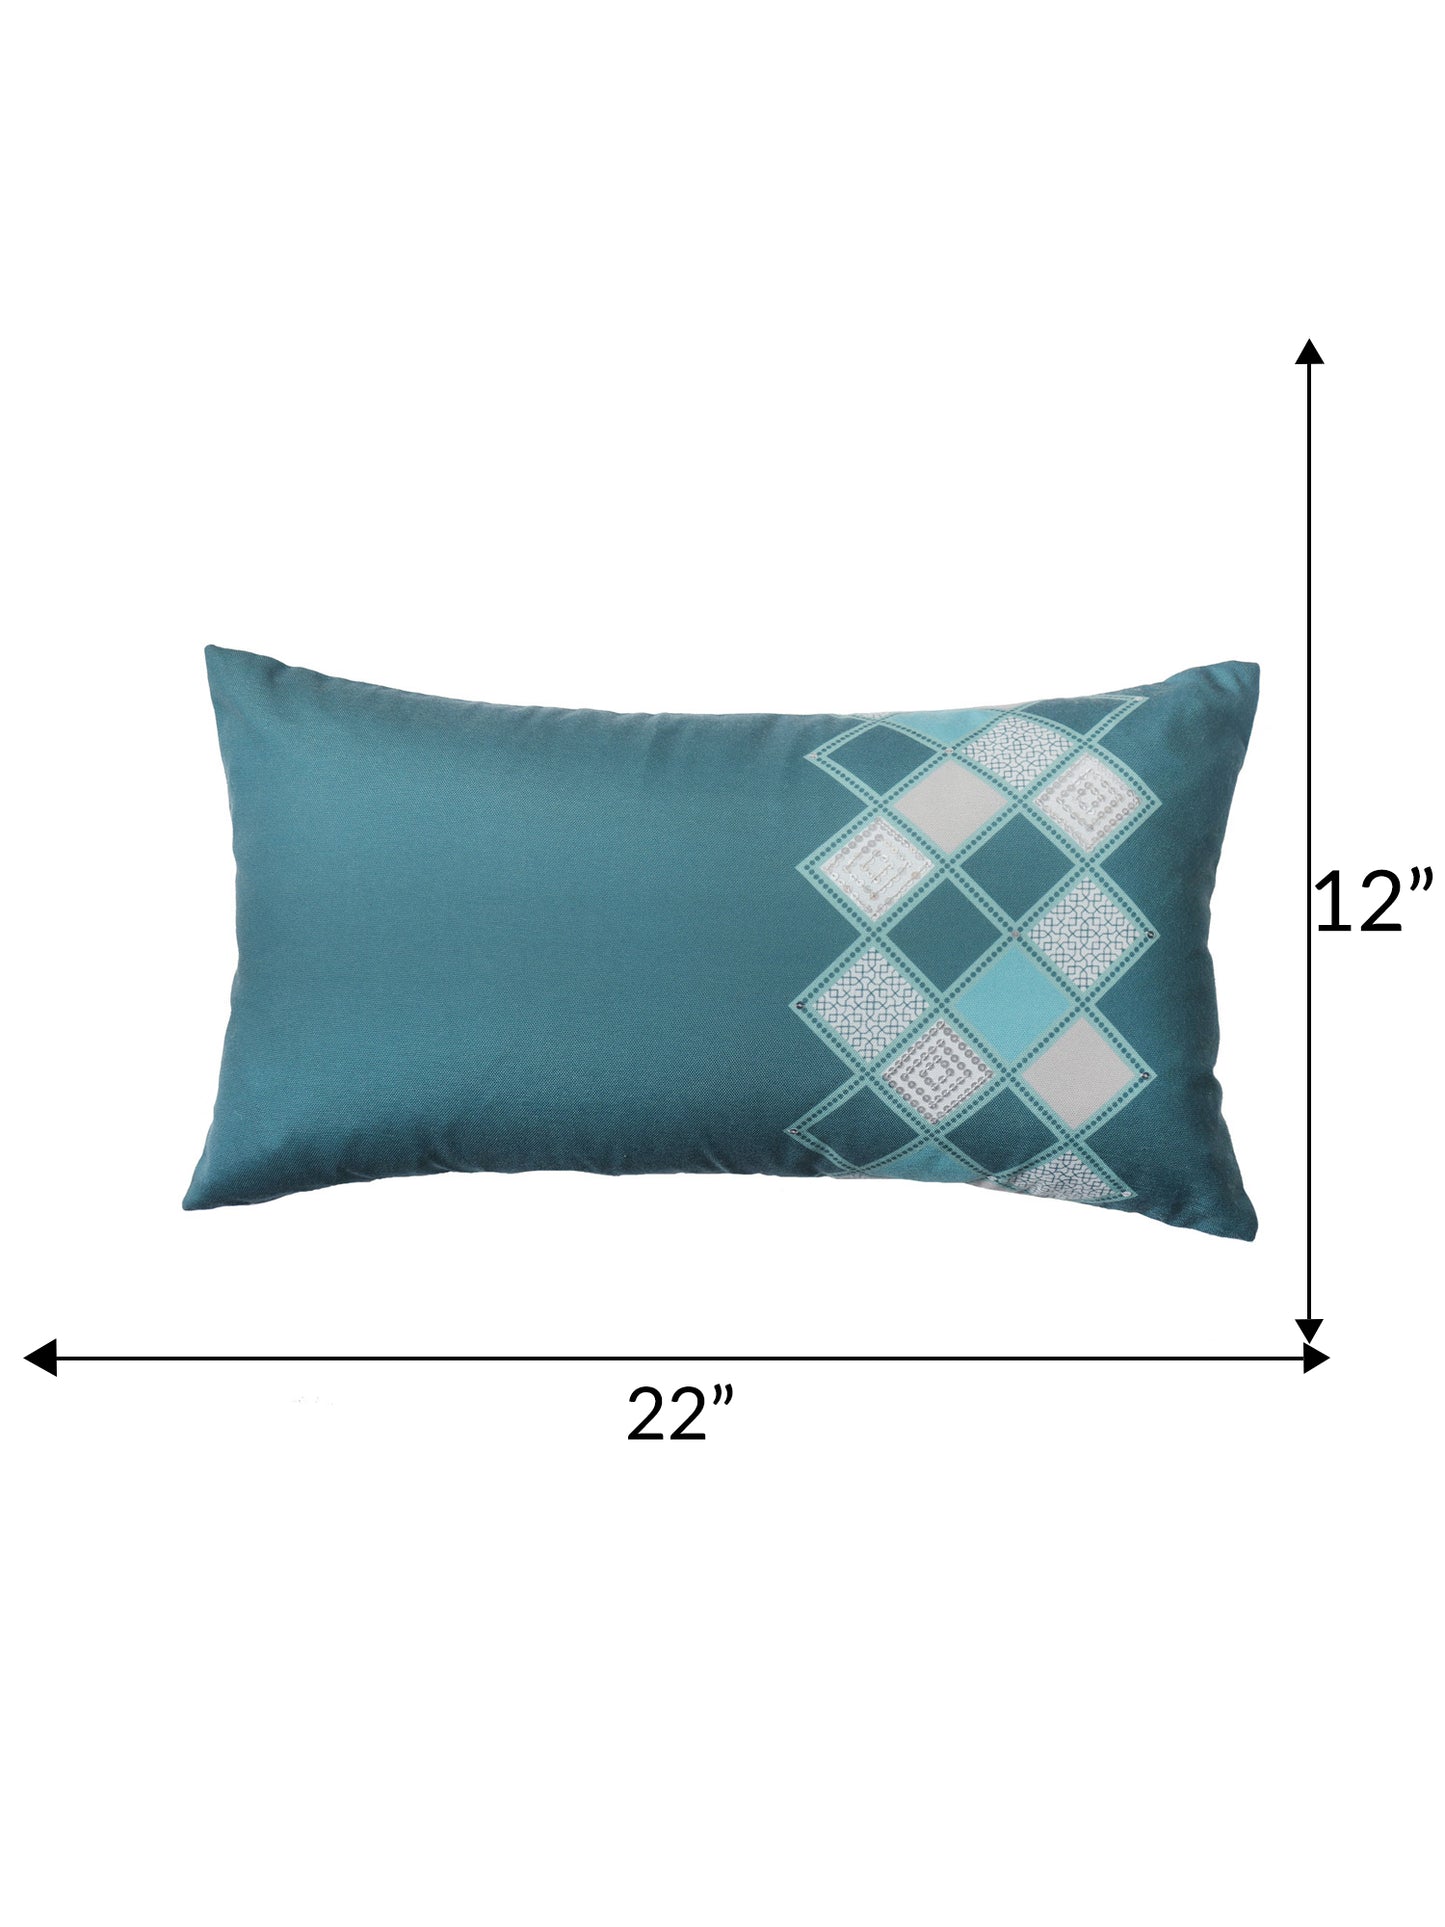 Cushion Cover for Sofa, Bed | Cotton Polyester| Geometric Design | Hand Embroidery | Teal Blue - 12x22in(30x56cm) (Pack of 1)